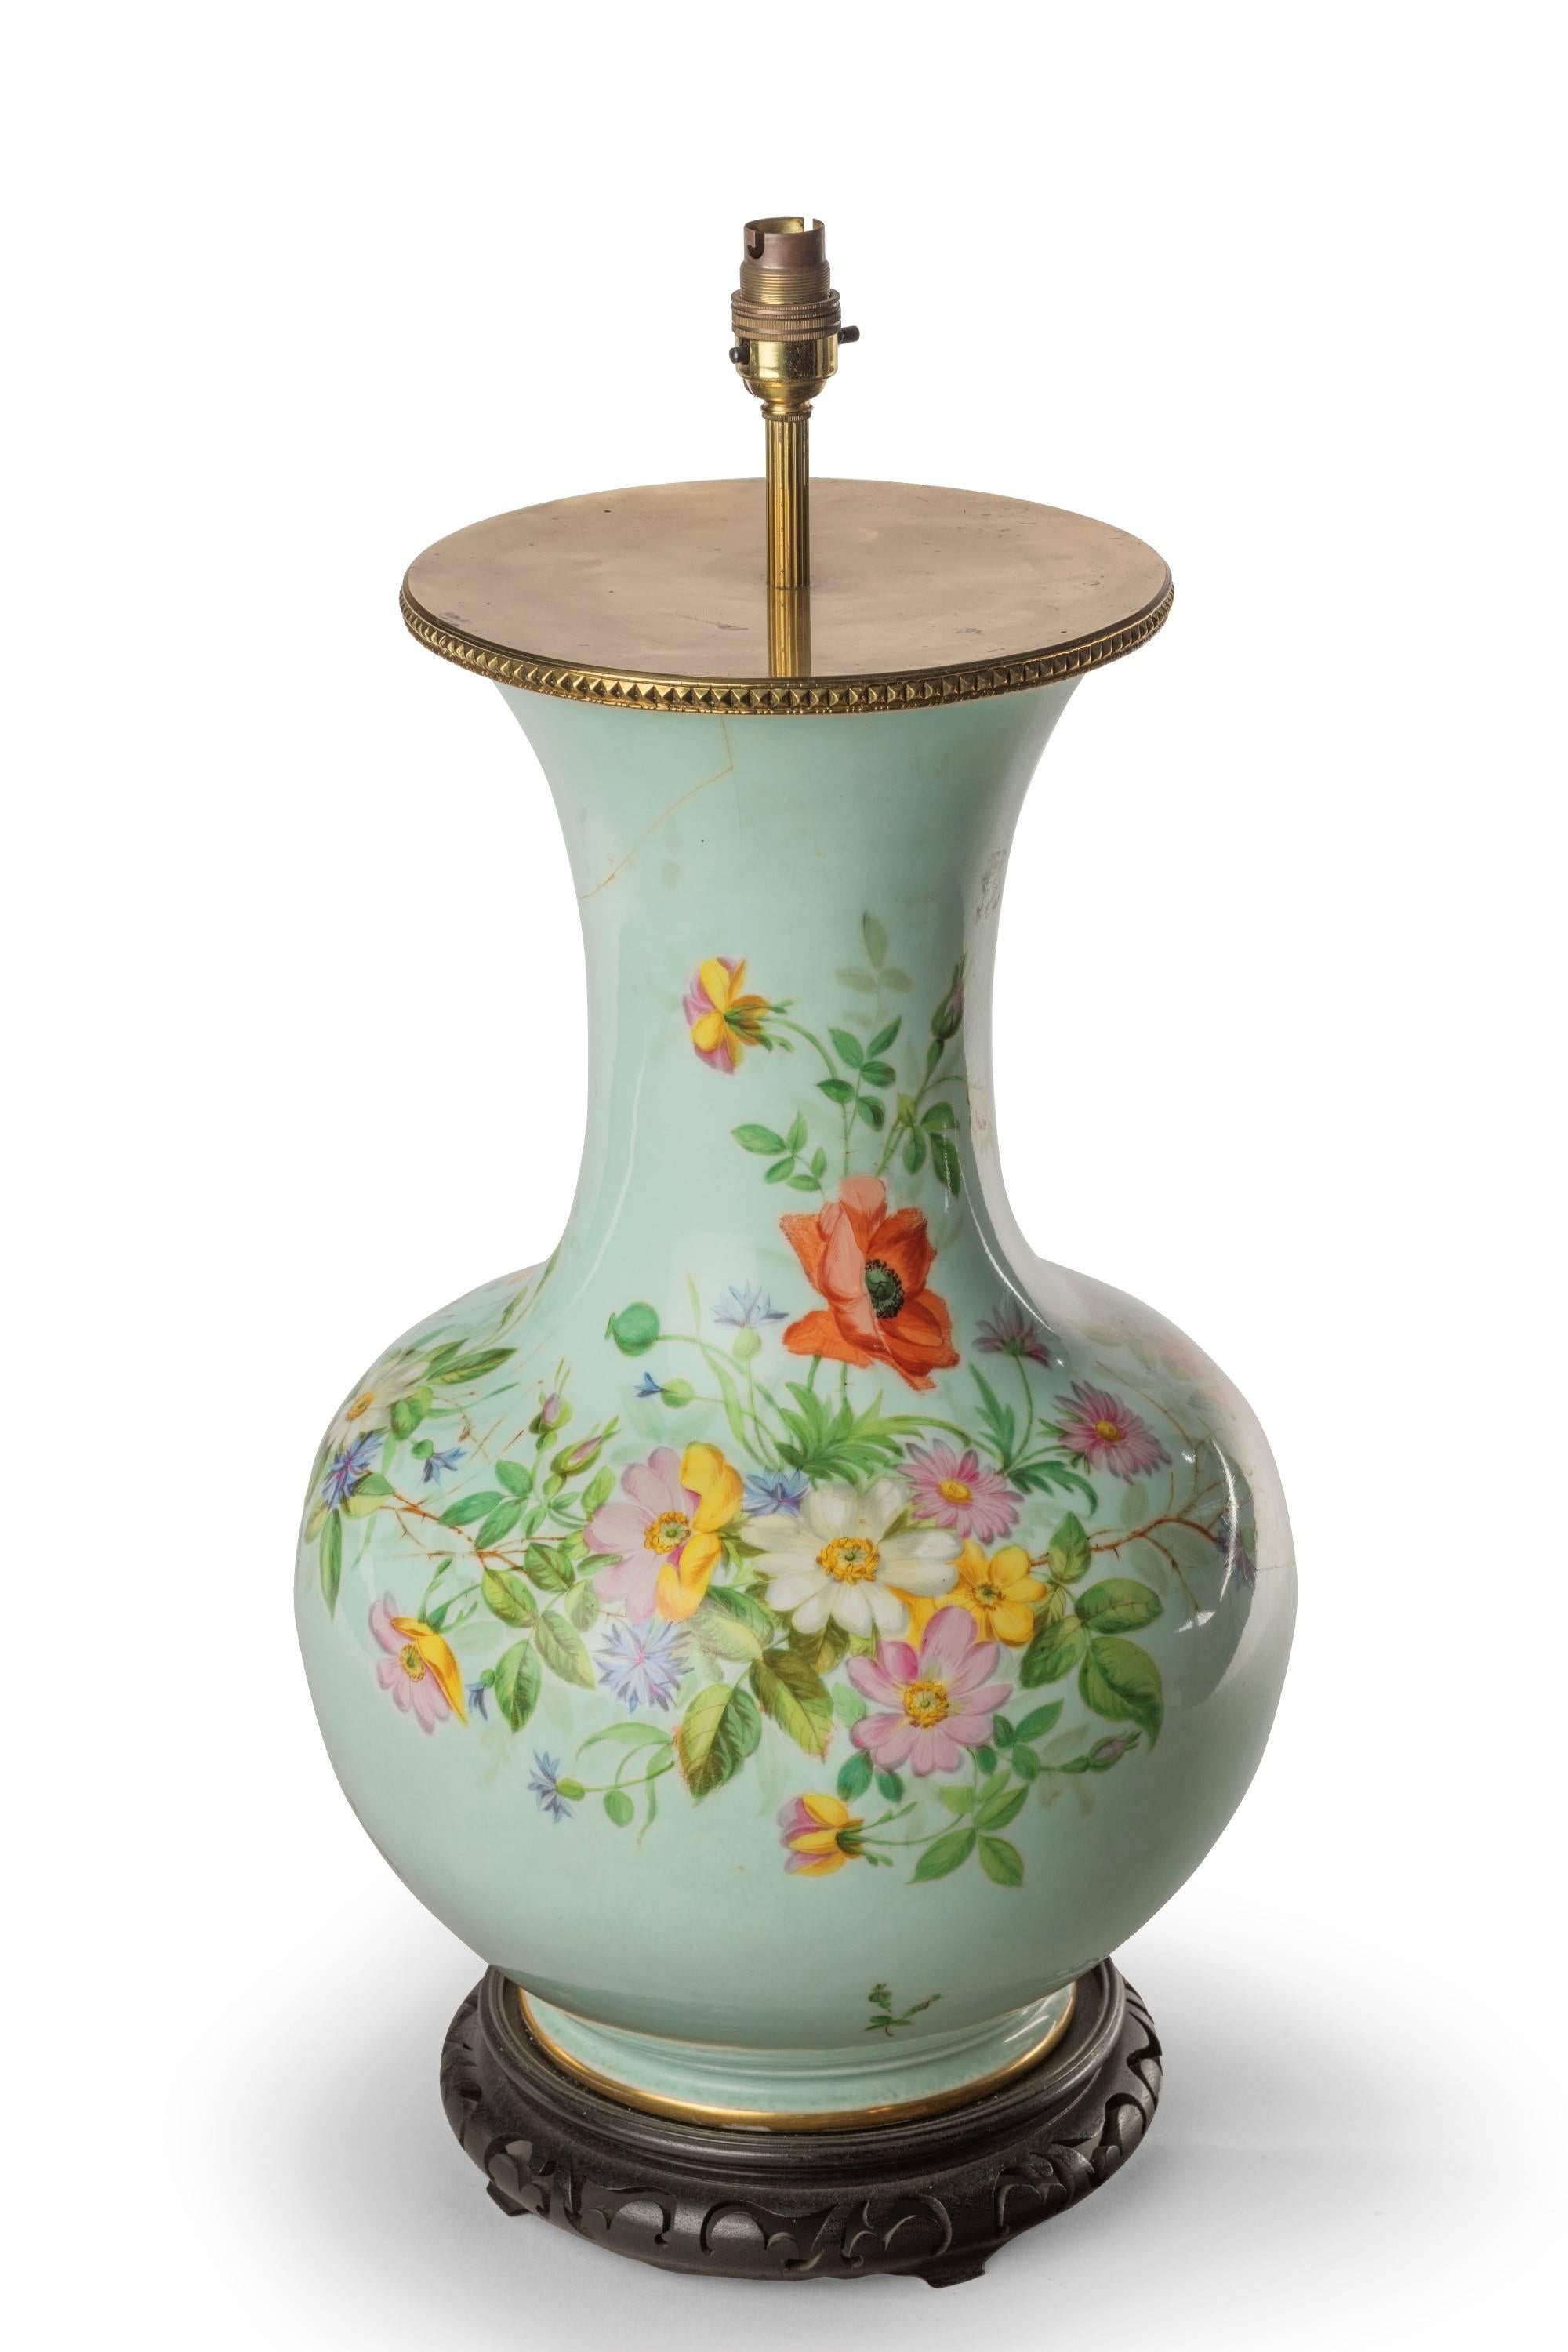 A very large and well decorated, 19th century French porcelain vase. Enamelled with flowers and foliage. The top section repaired.

Shades are not included in the price of our lamps. We do have a competitively priced range of shades for all of our